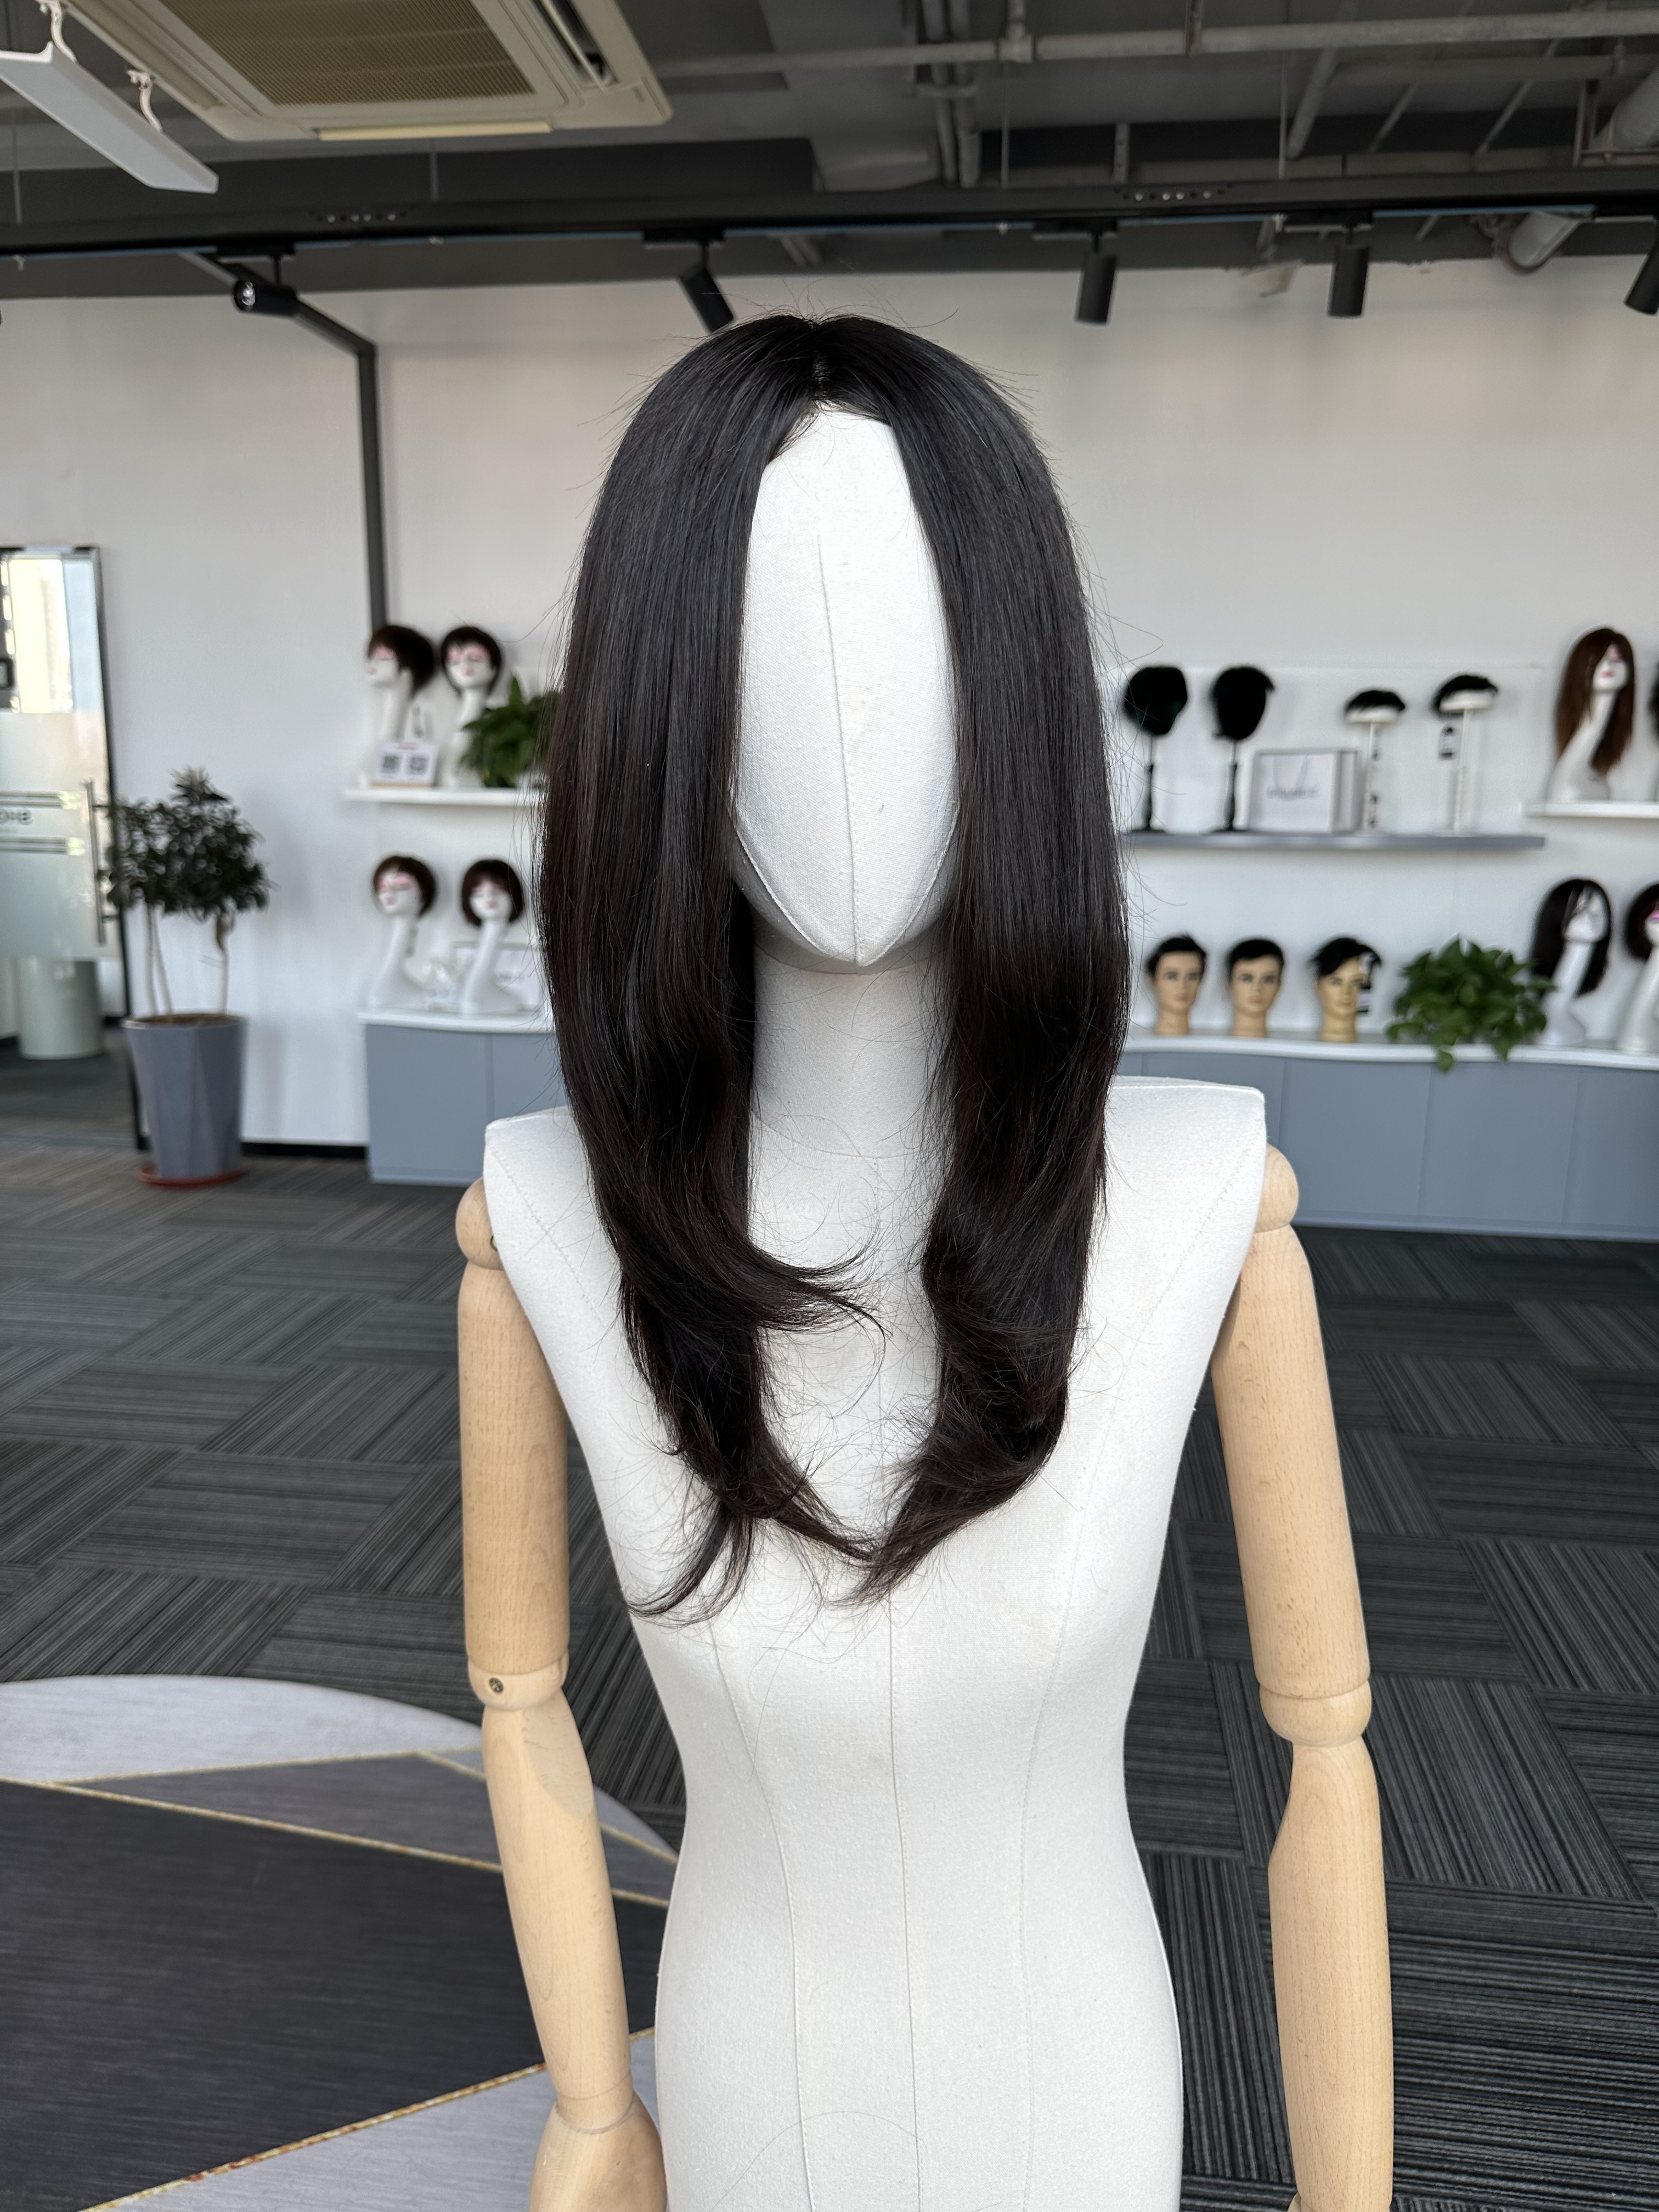 Dolago Luxury Full Poly Skin Medical Wigs For Female Alopecia And Chemo Hair Loss 130% Women's Virgin Human Hair Straight Medical Wigs For Cancer Patients For Thinning Crown Wholesale Free Shipping